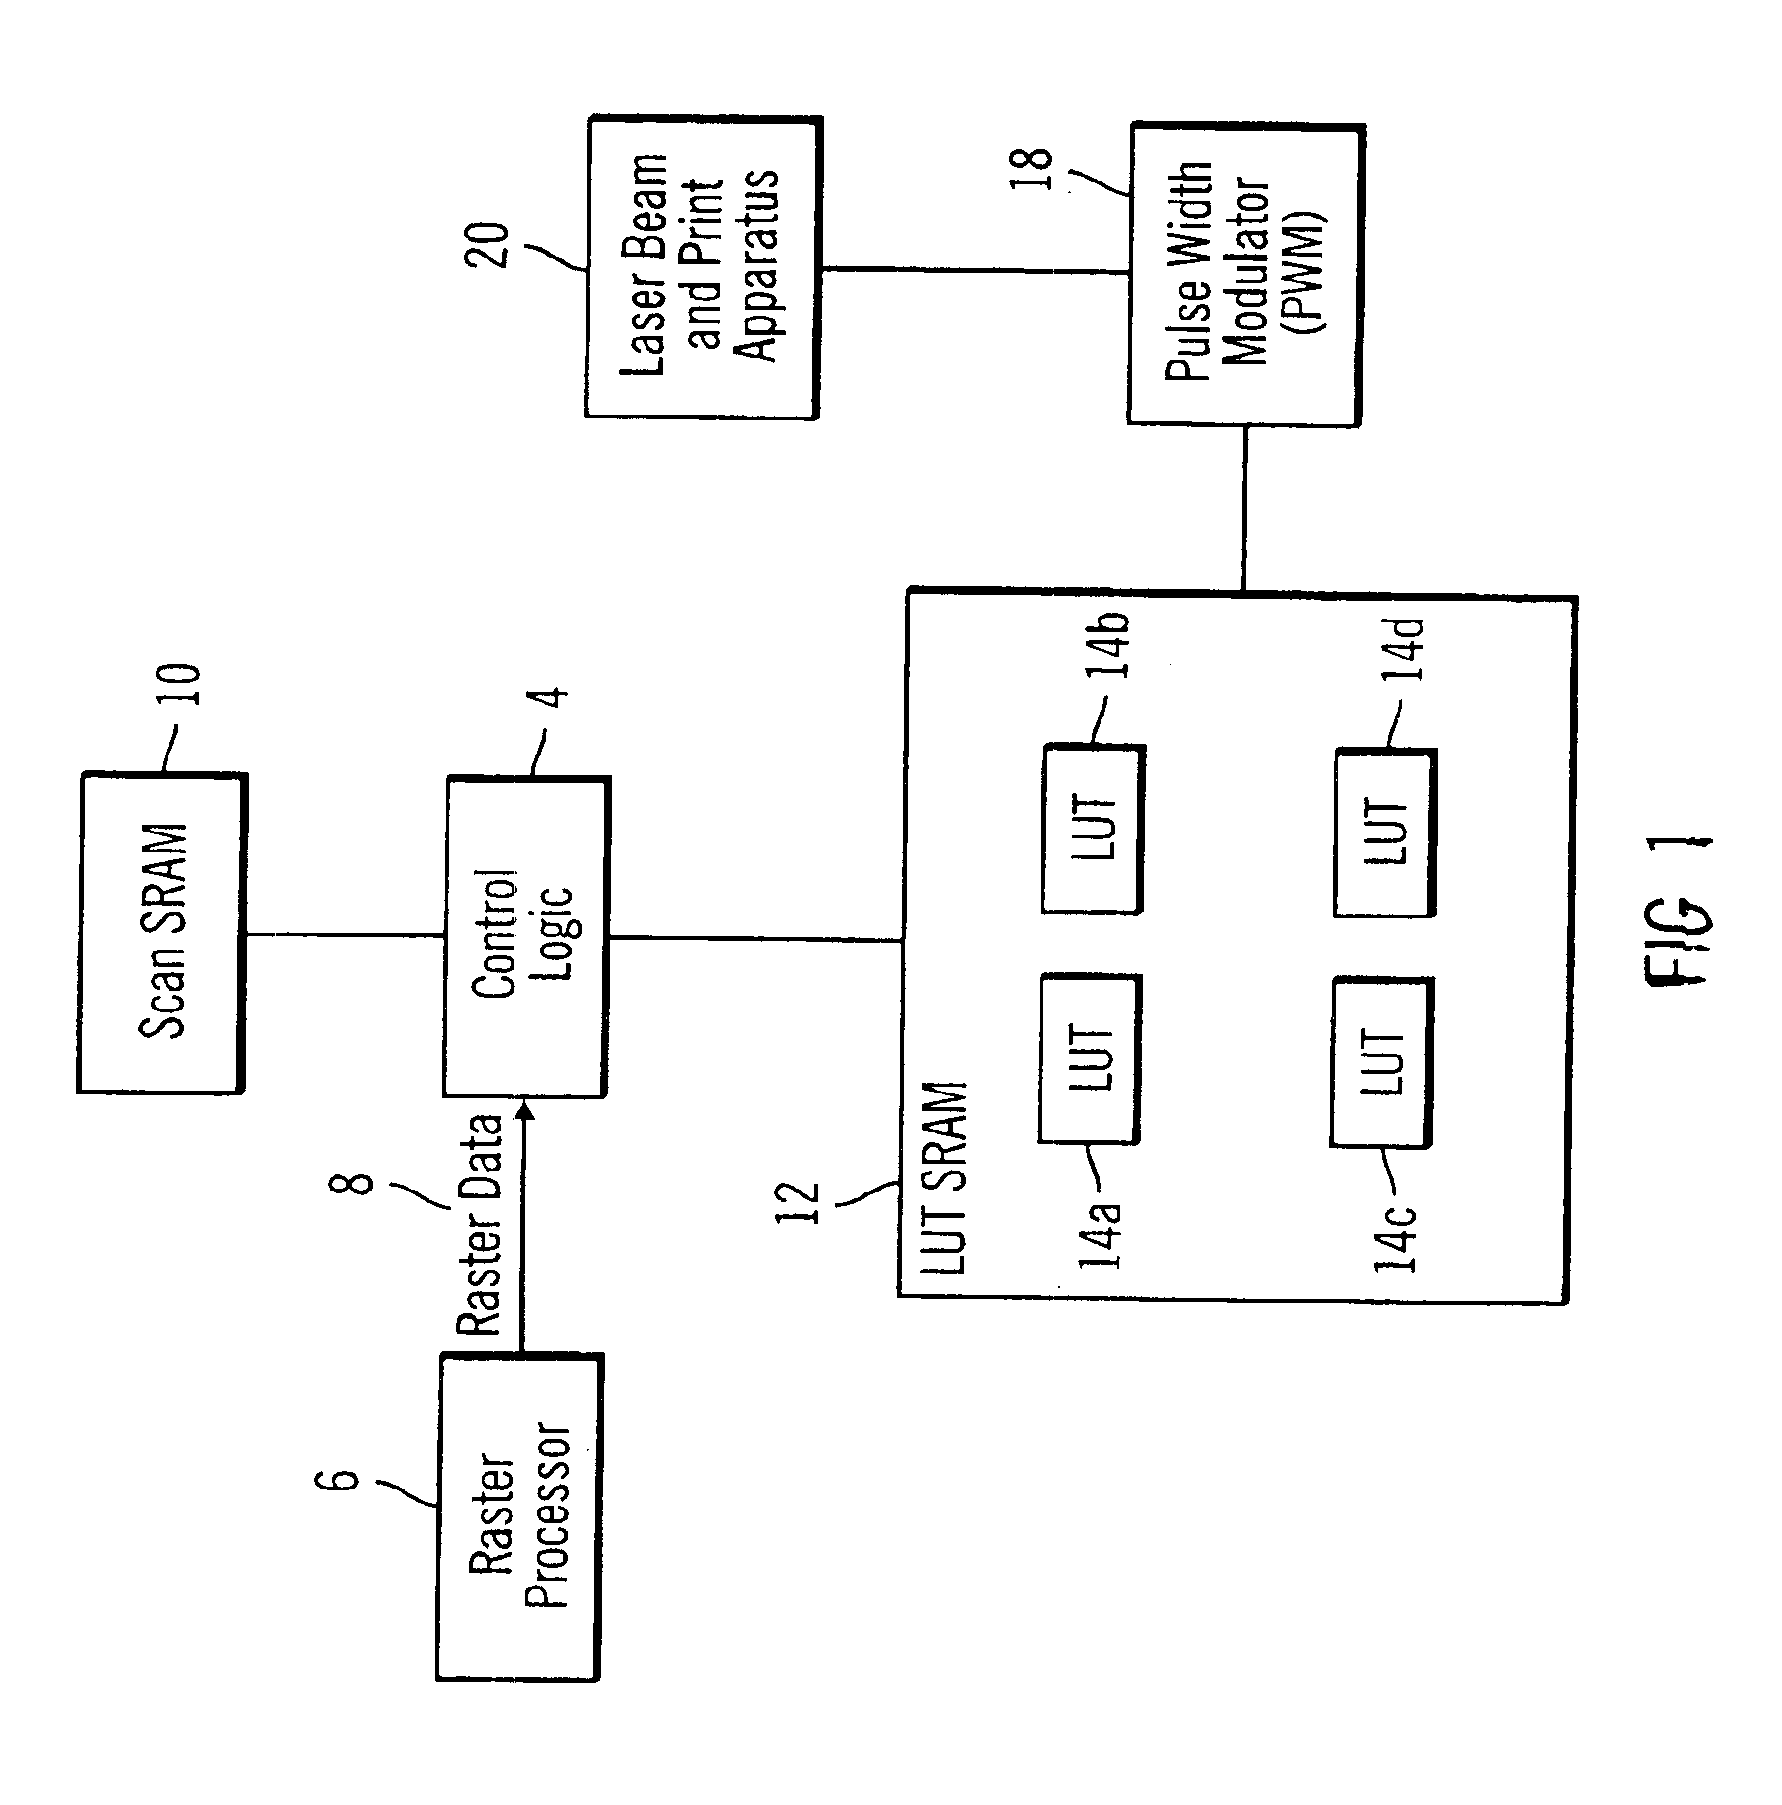 Method, system, and program for reducing toner usage in print output